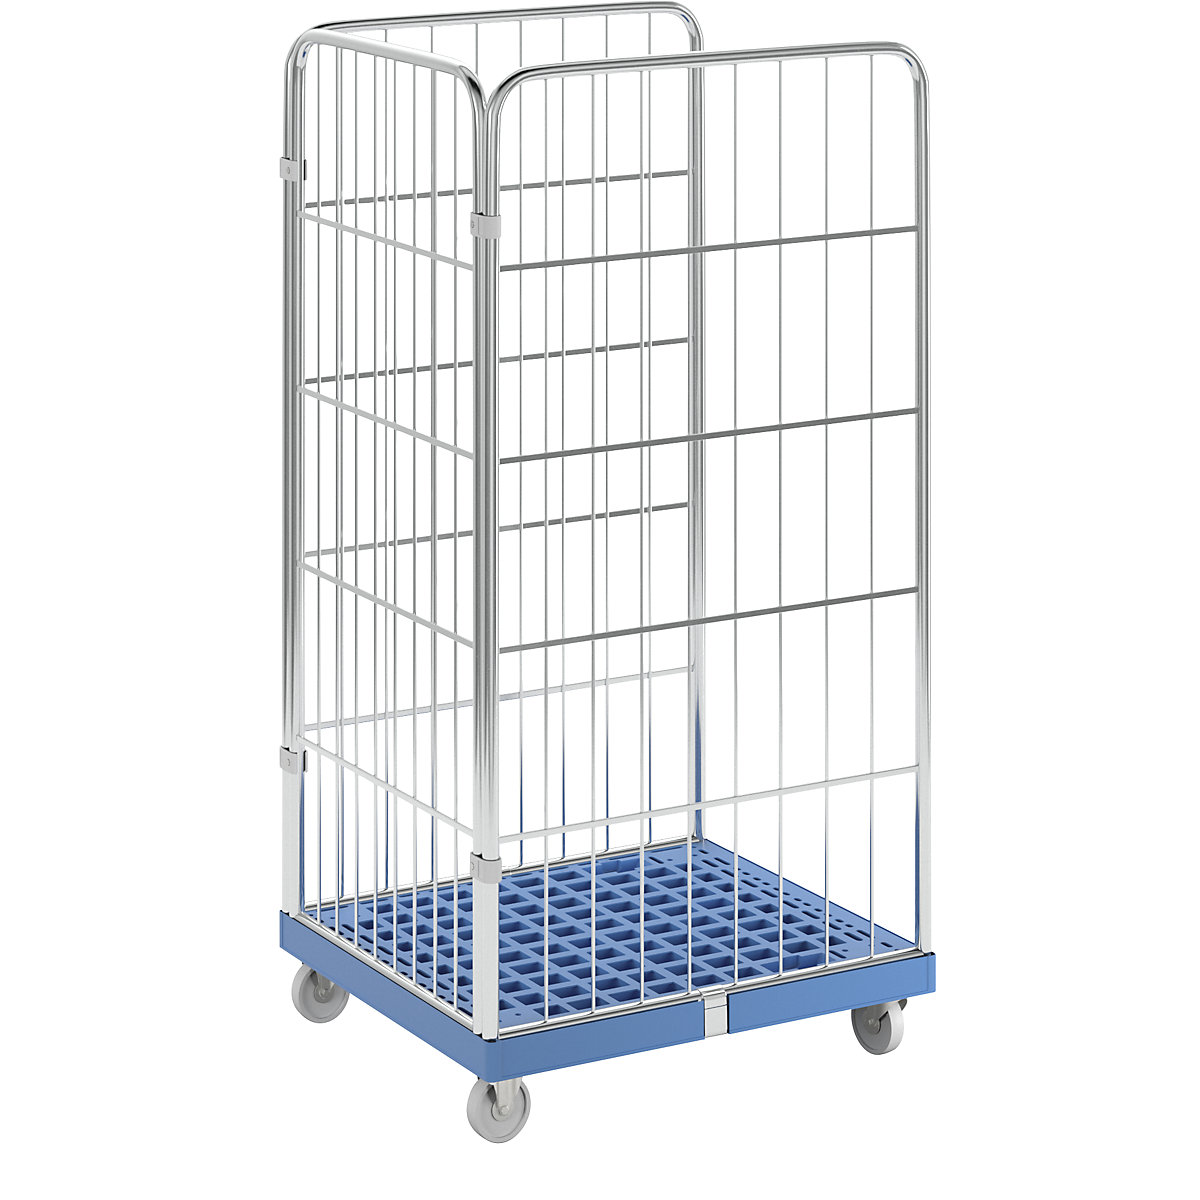 Roll container with mesh panels, plastic transport dolly, 3-sided, blue zinc plated mesh, with inclined shelf support-13